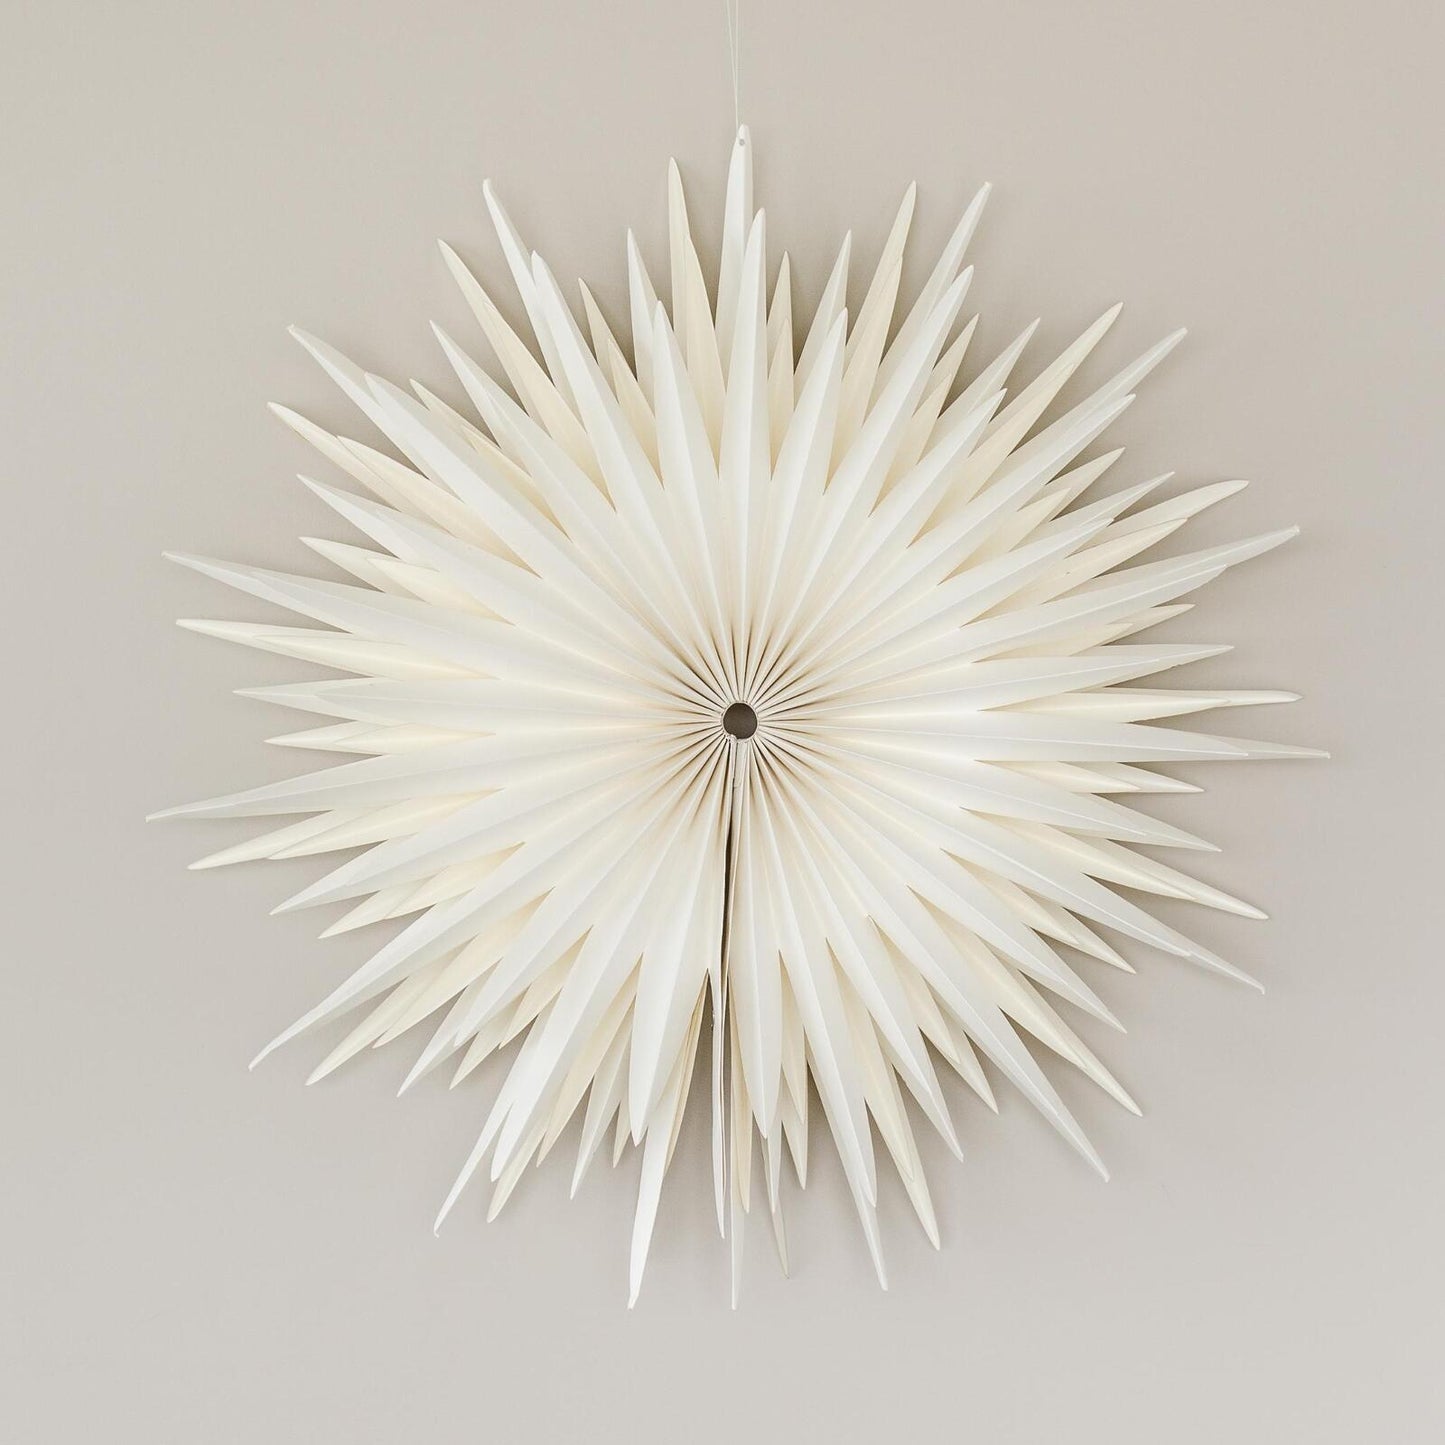 Window & Wall Hanging Star Ornament Off-White HALF PRICE